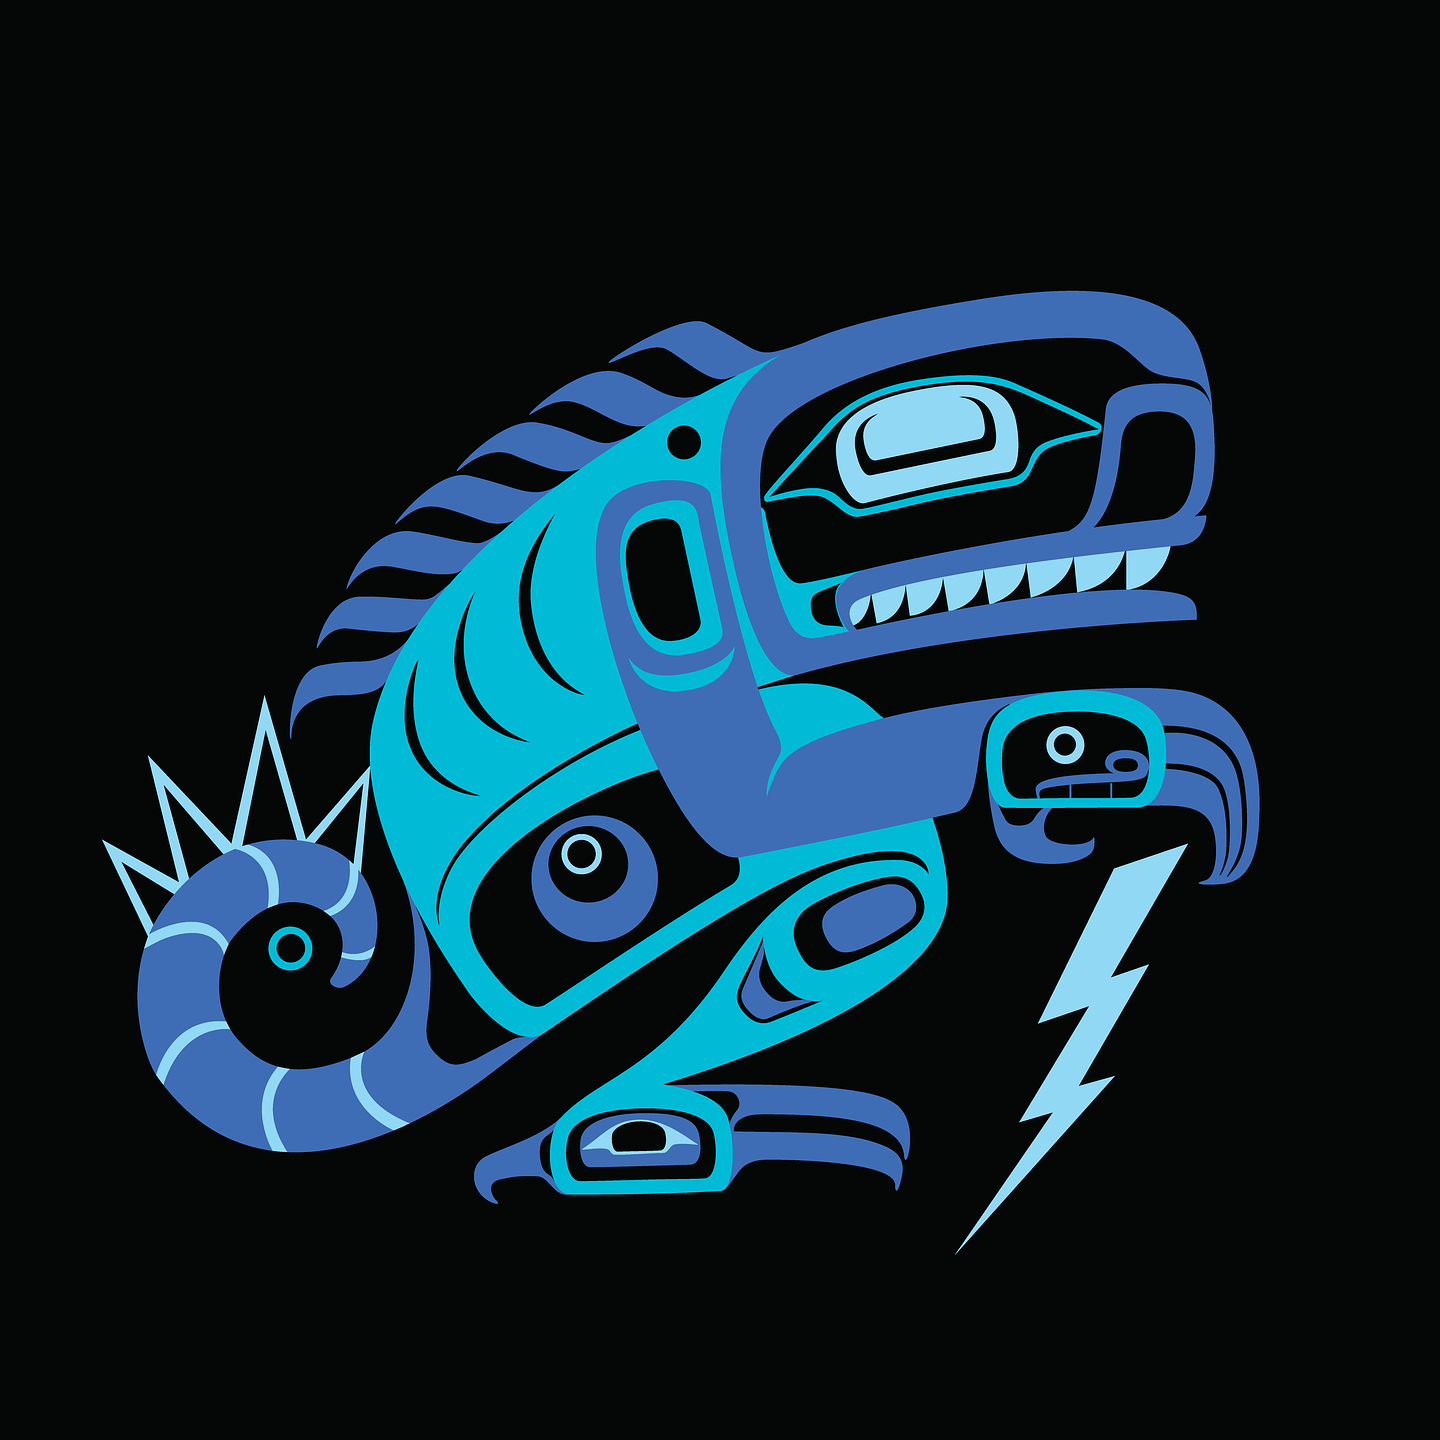 A graphic of a blue sea monster in Northwest Coast art style on a black background. The sea monster holds a lightning bolt in its hand.